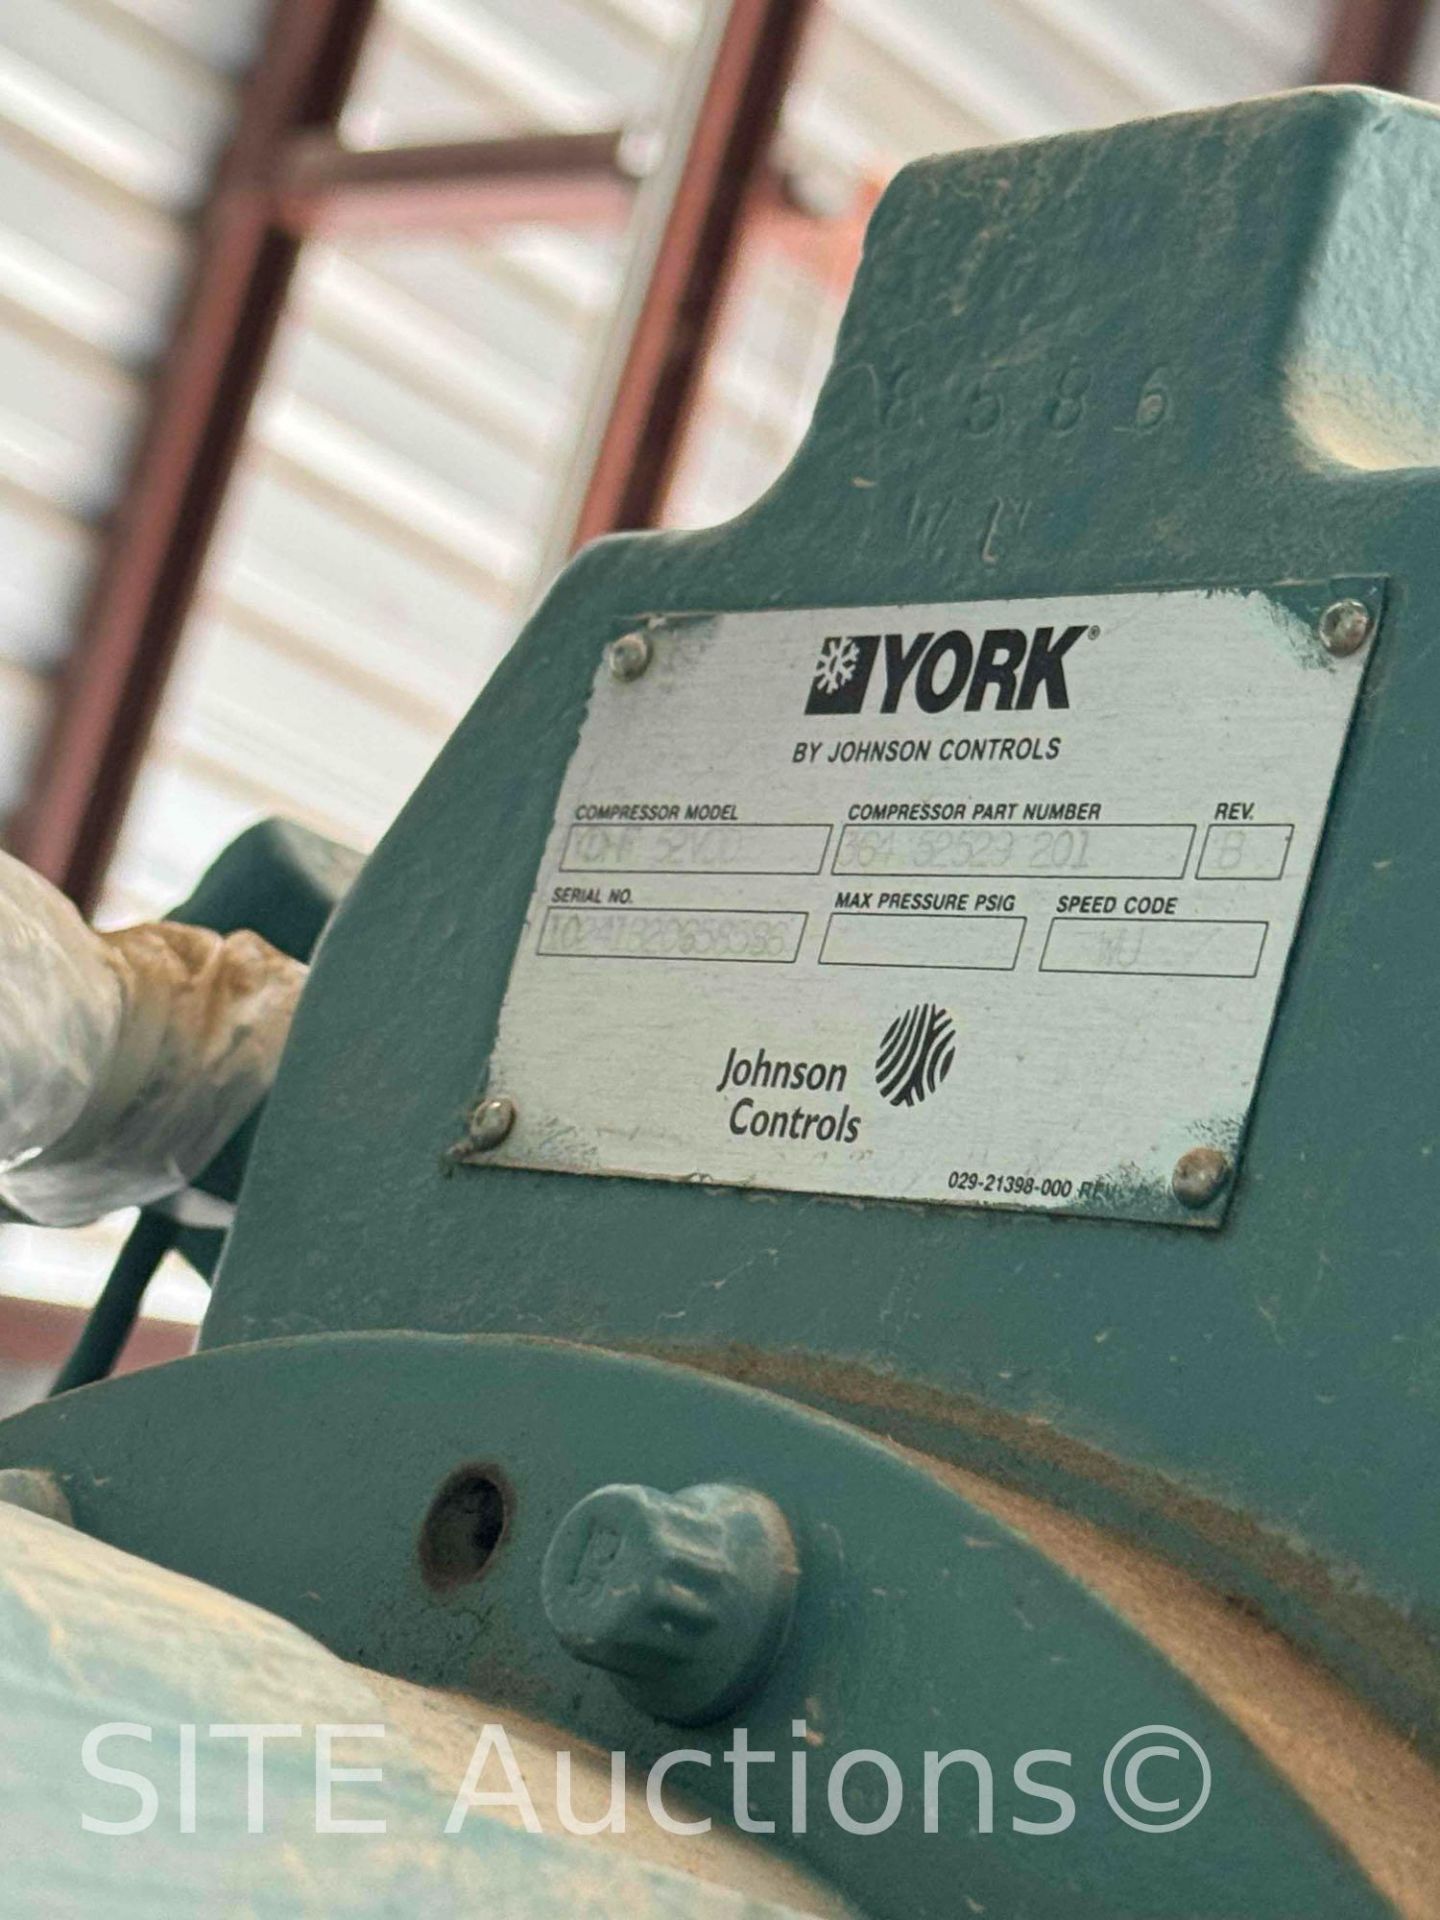 UNUSED 2012 York by Johnson Controls MaxE Centrifugal Chiller - Image 12 of 16